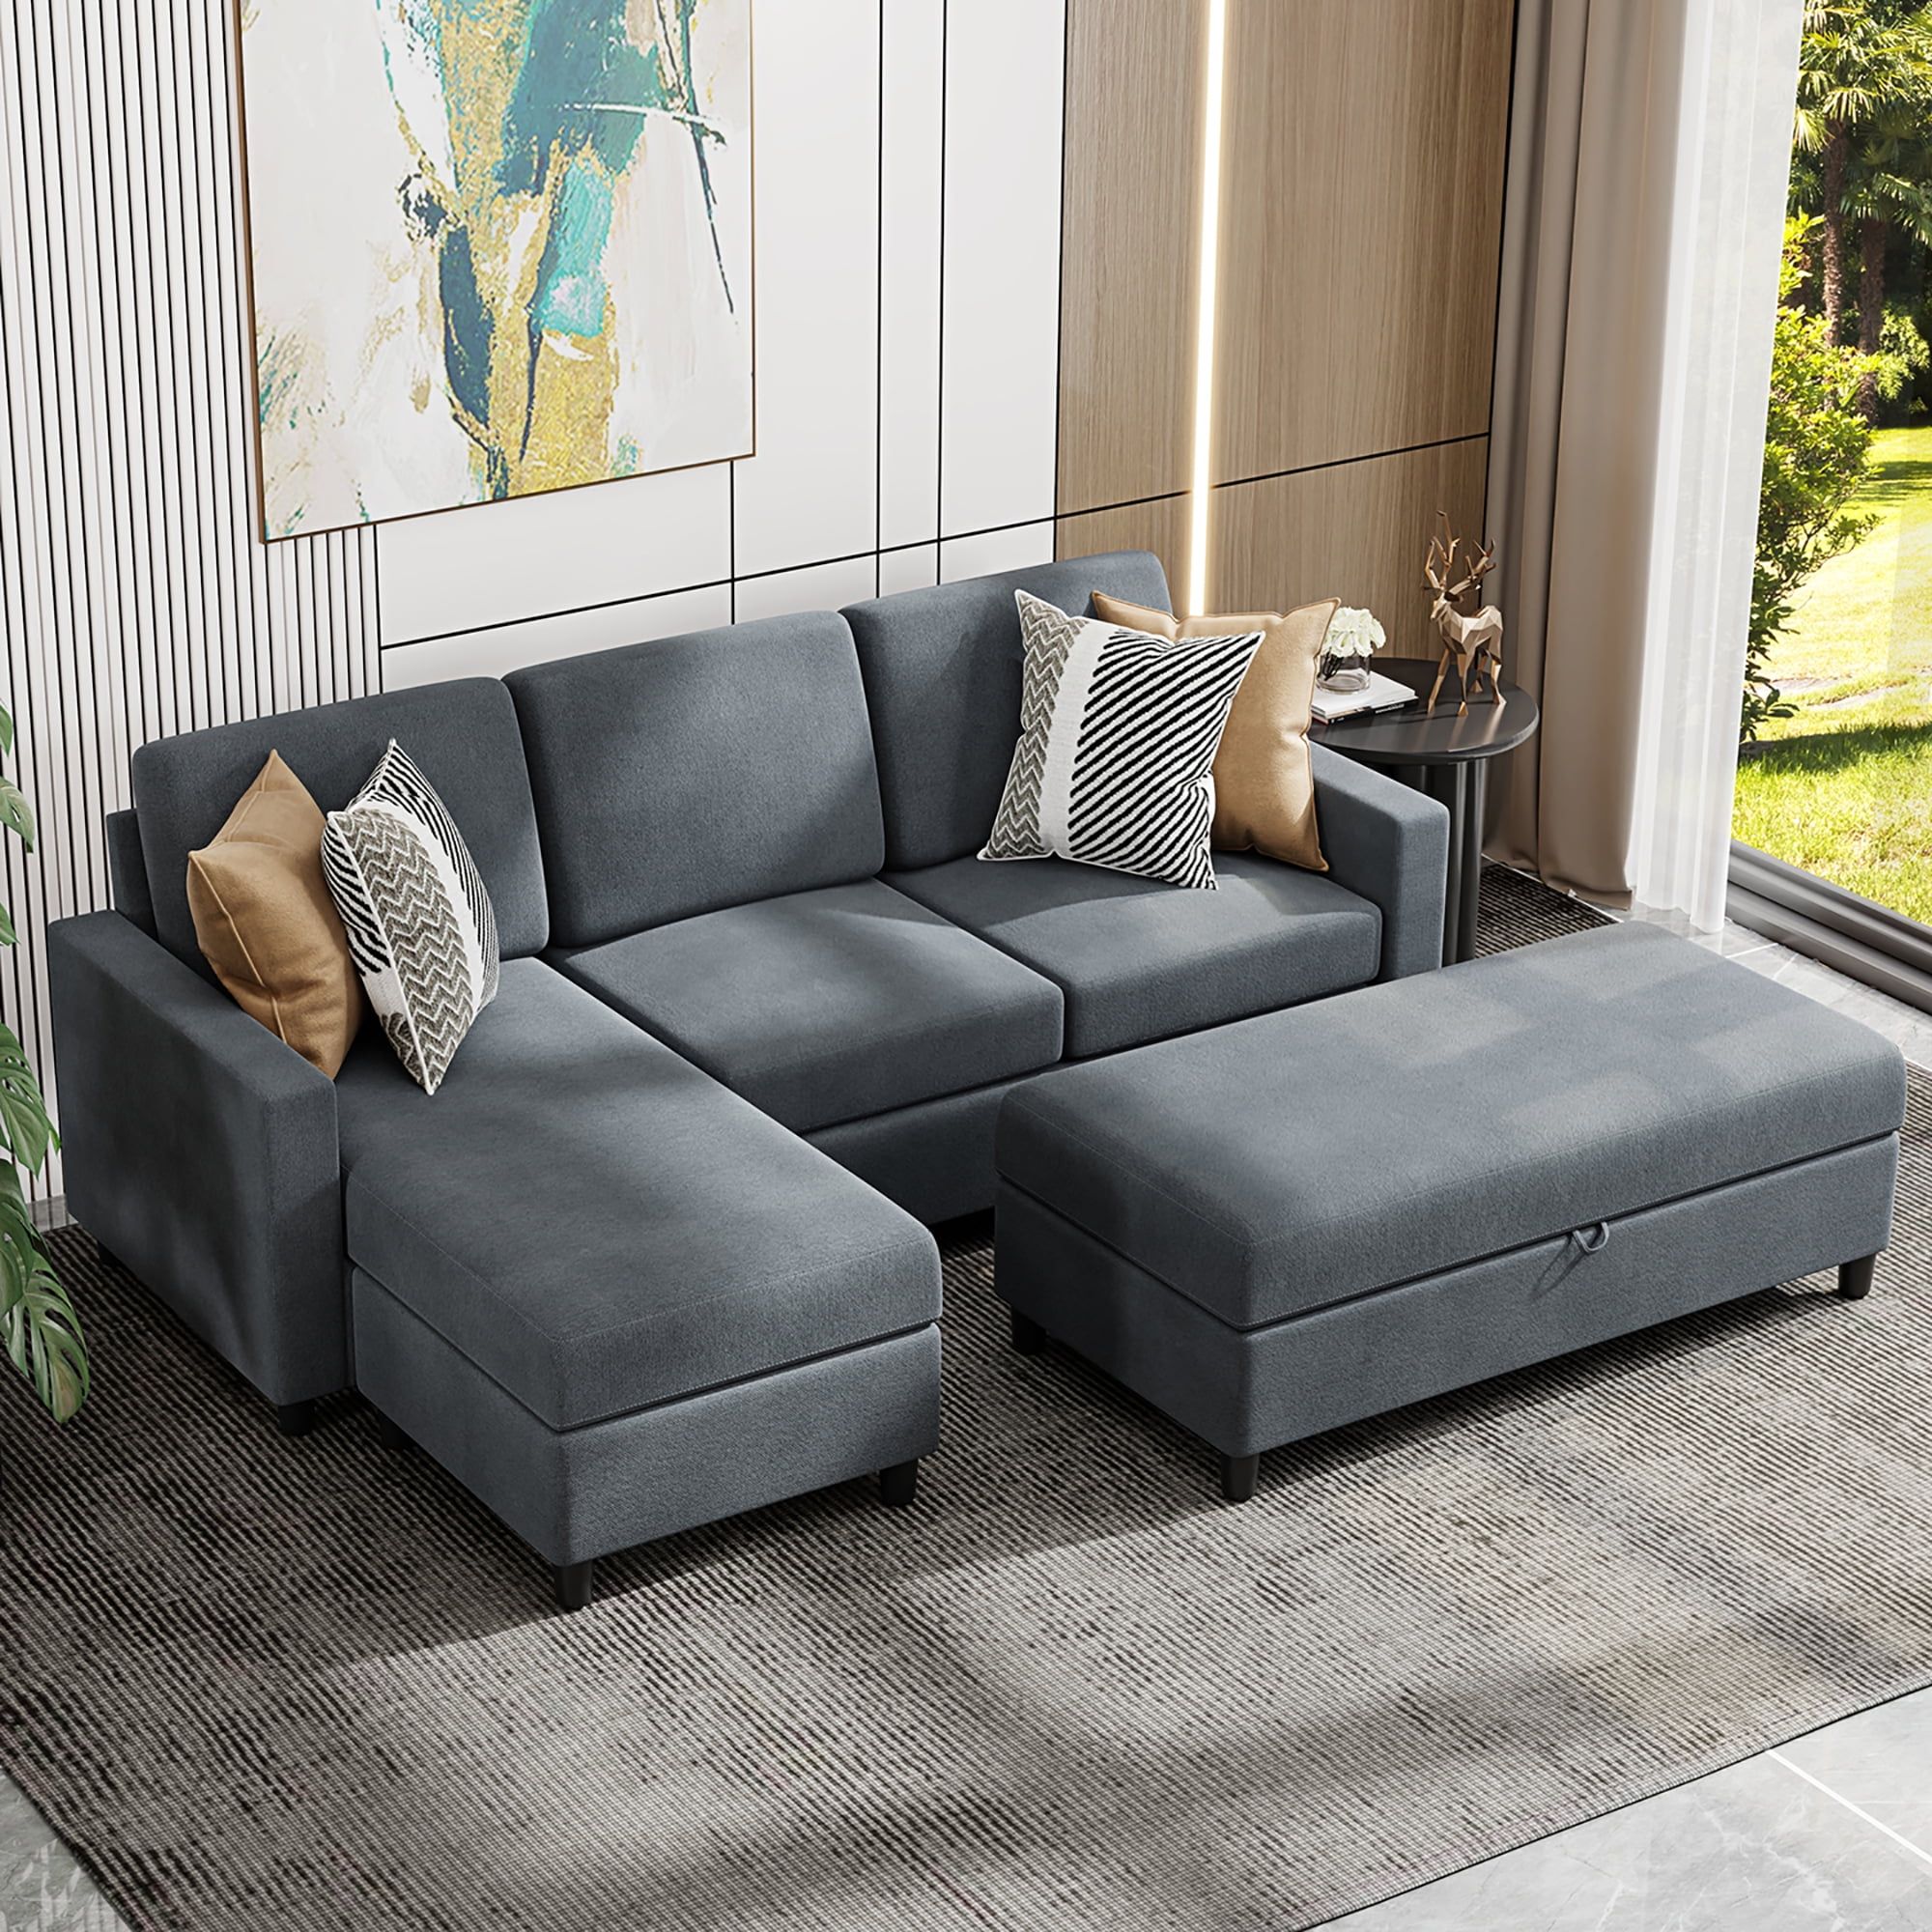 Convertible Sectional Sofa Couch With Storage Ottoman, L Shaped Wide  Reversible Chaise With Linen Fabric(charcoal Grey) – Walmart In Gray Linen Sofas (View 13 of 15)